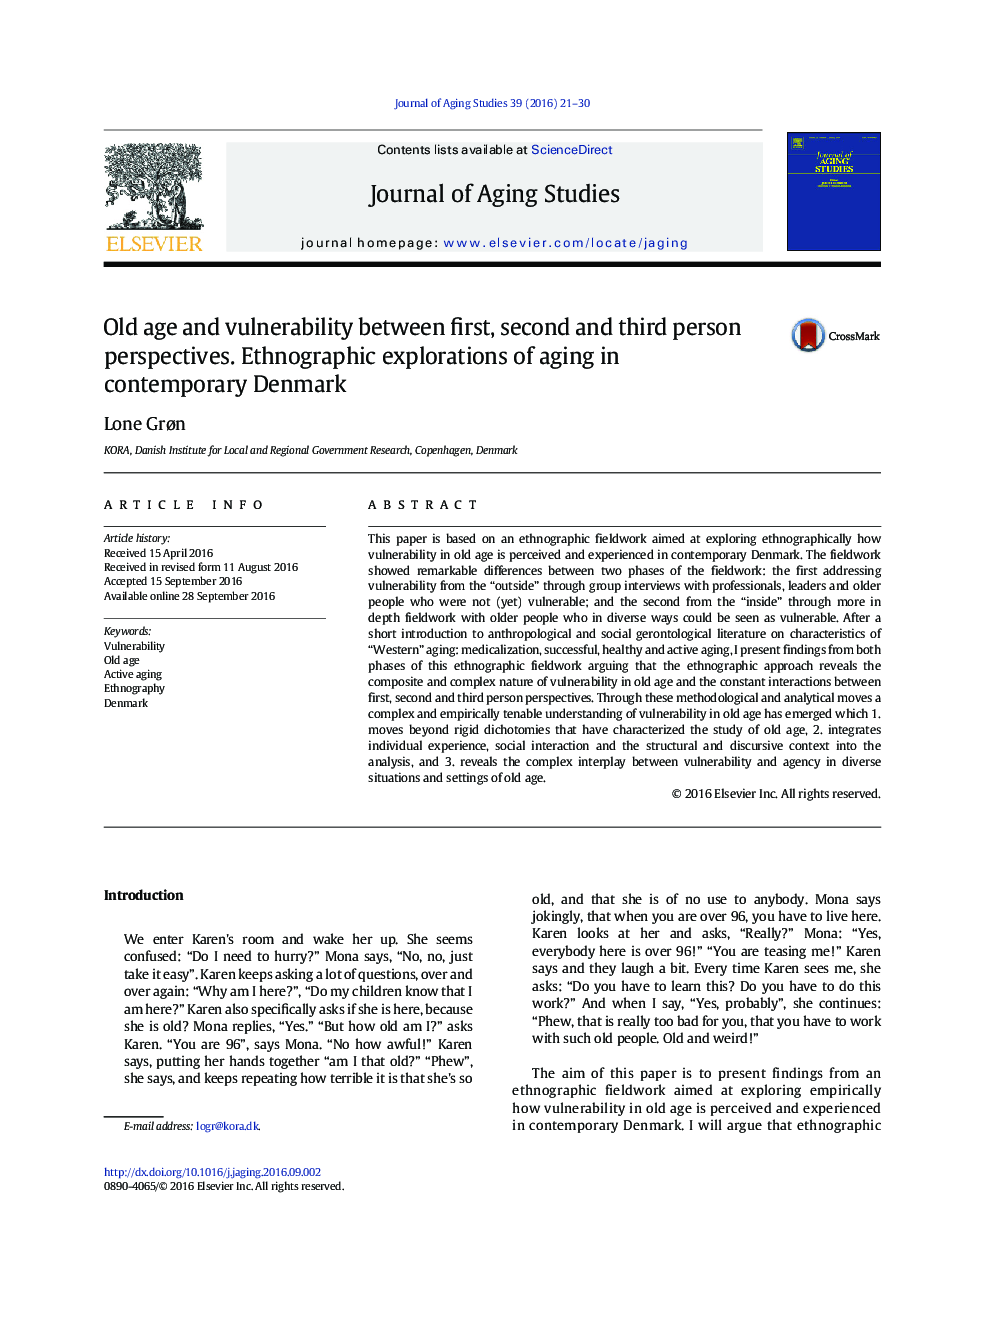 Old age and vulnerability between first, second and third person perspectives. Ethnographic explorations of aging in contemporary Denmark